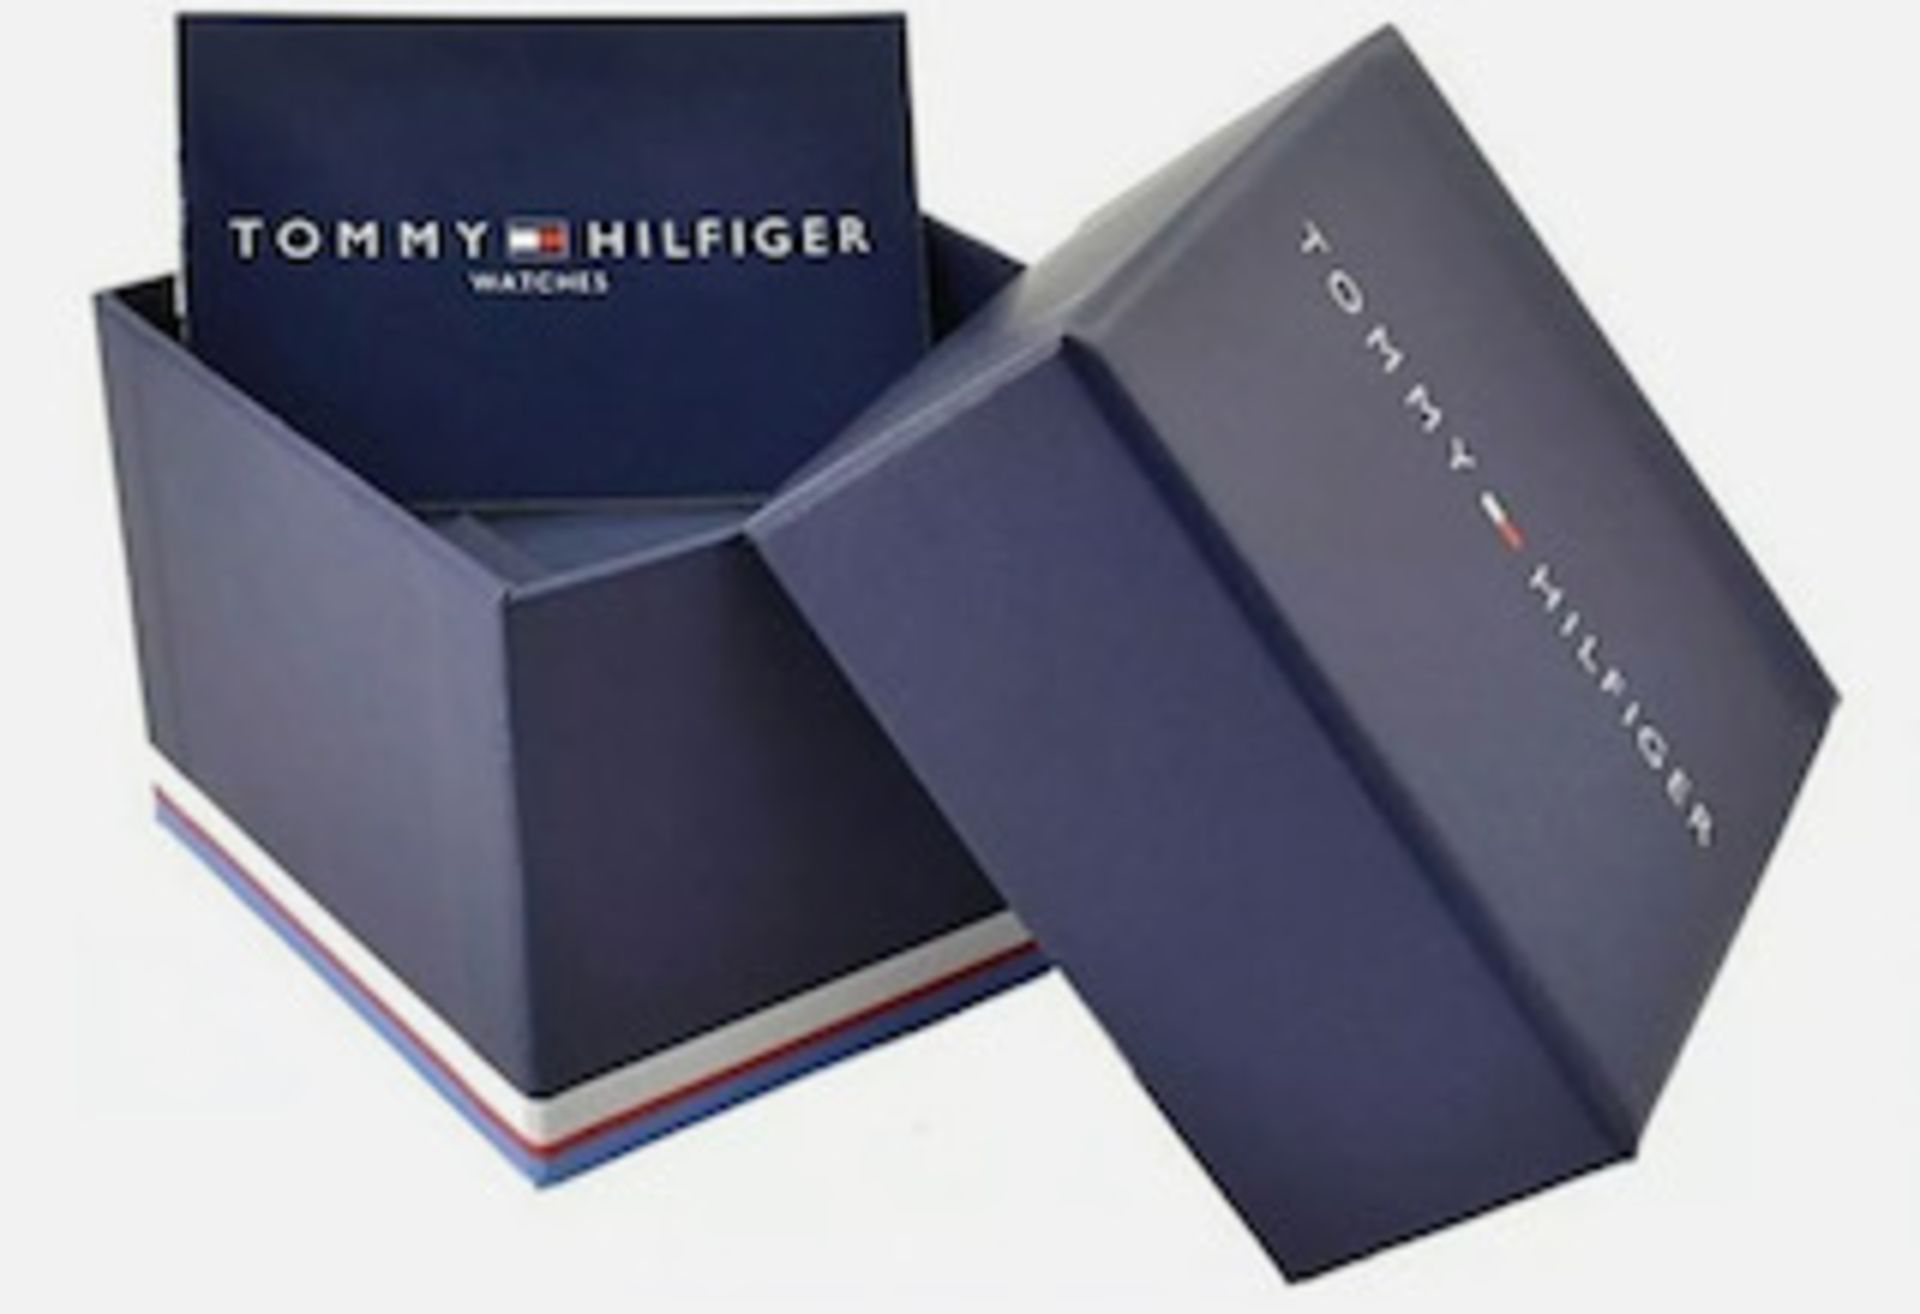 Tommy Hilfiger 1791639 Men's Black And Silver Stainless Steel Bracelet Watch - Image 7 of 7